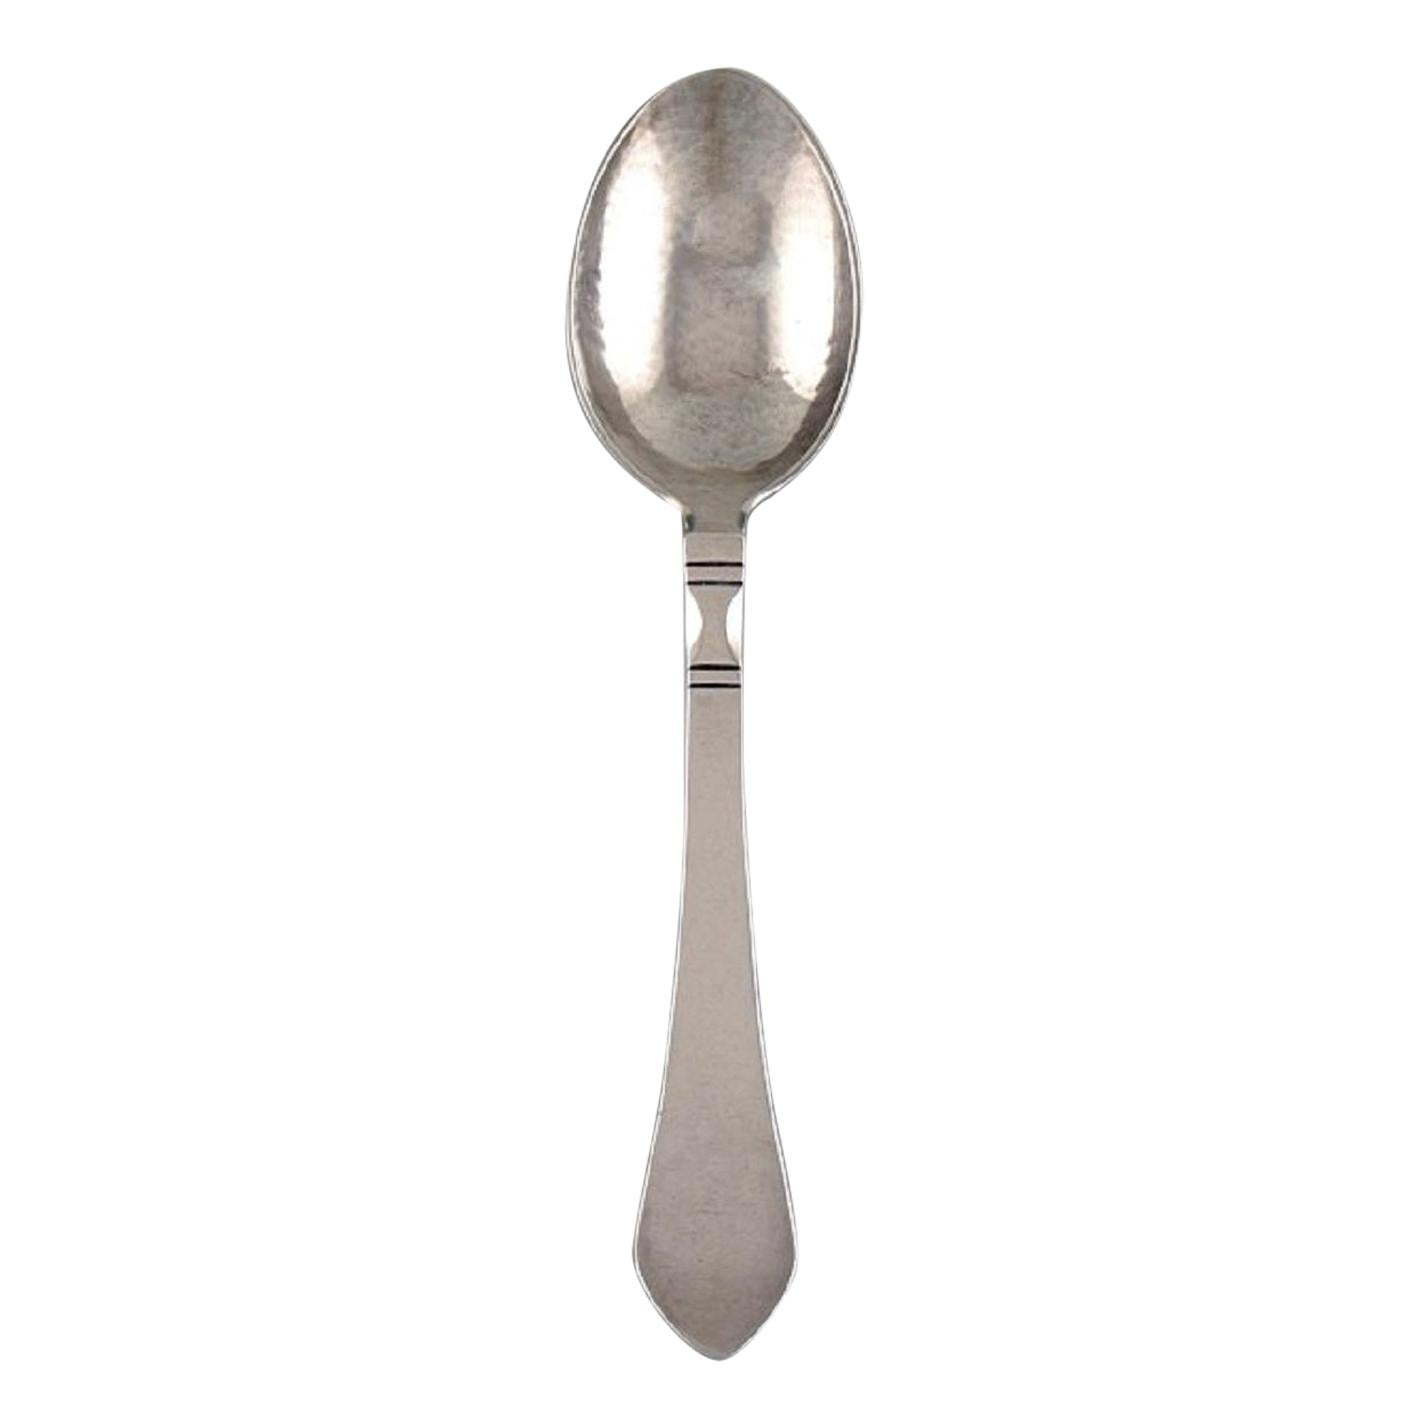 Georg Jensen Continental Dessert Spoon in Sterling Silver, 3 Spoons Available